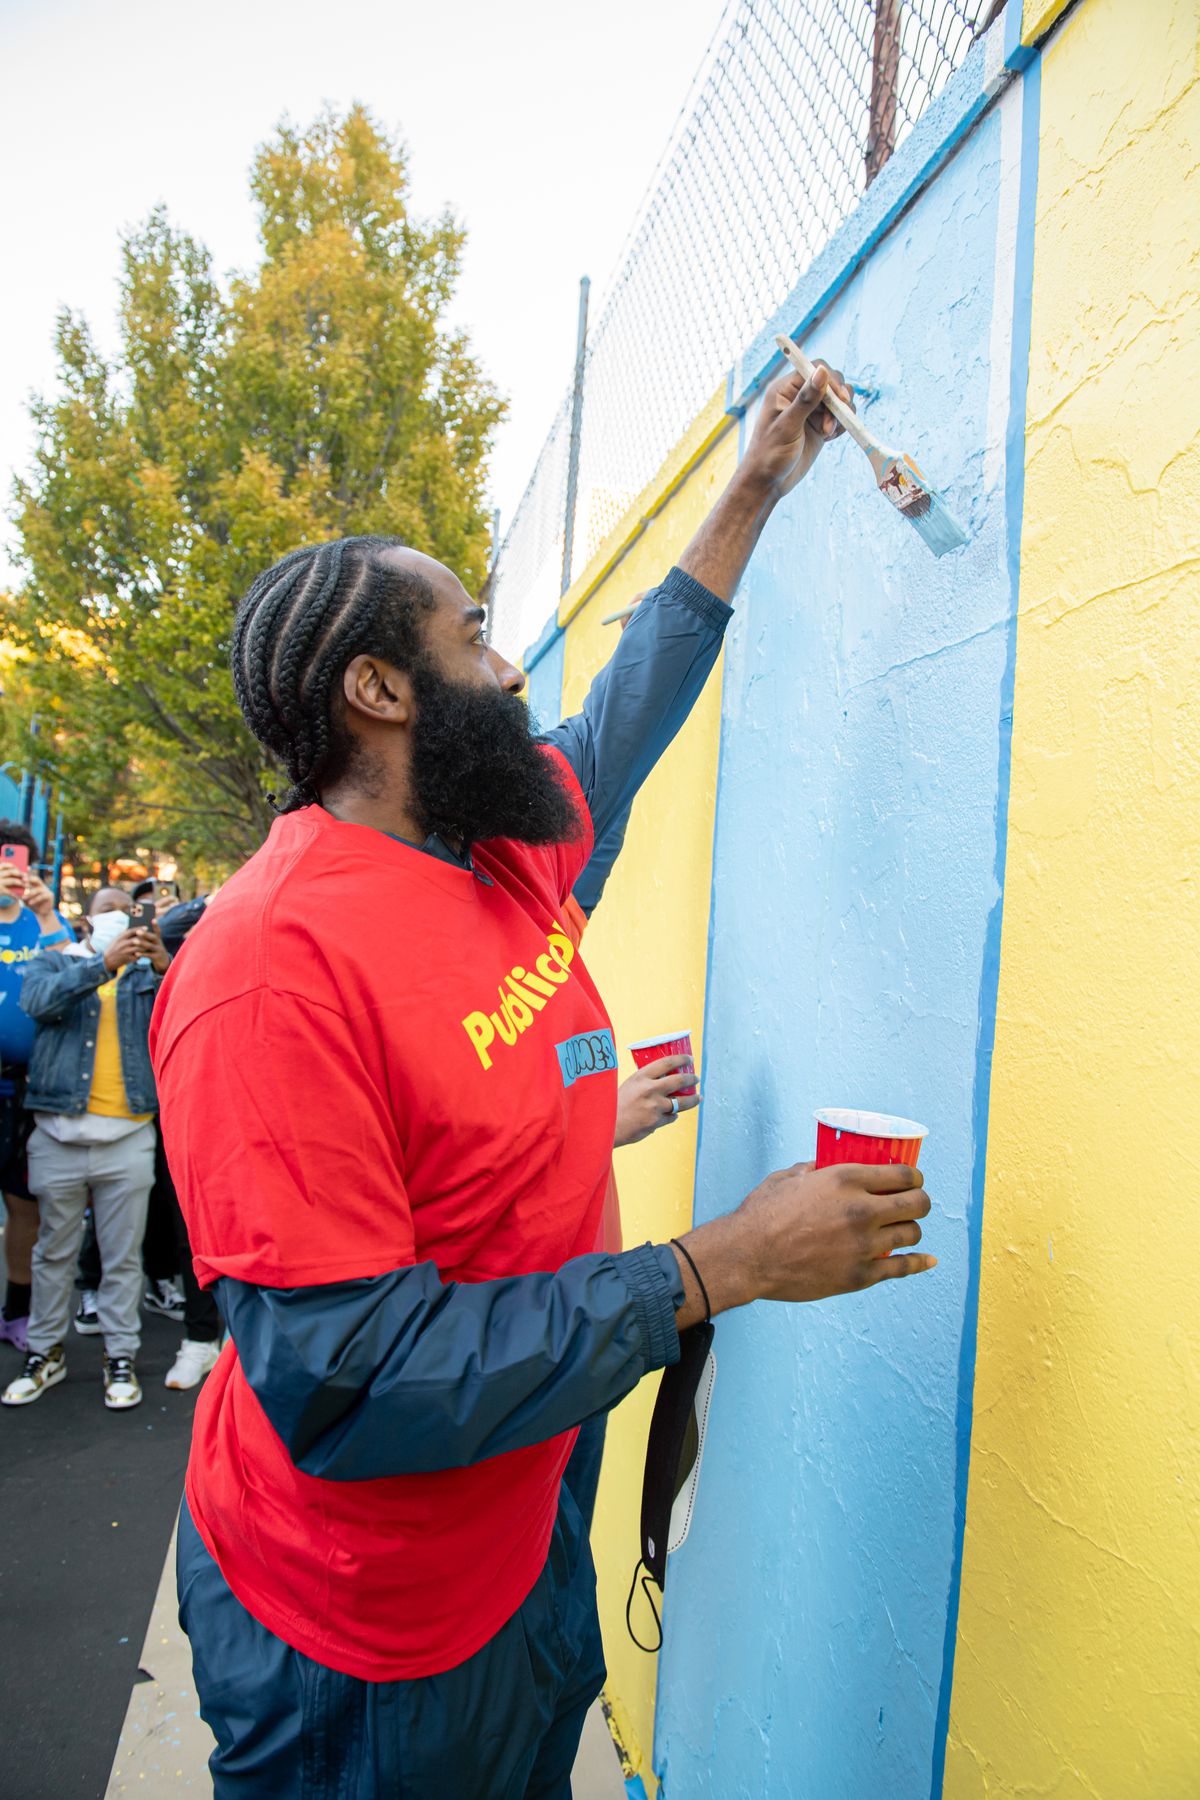 NBA Star James Harden Paints With New York City Students